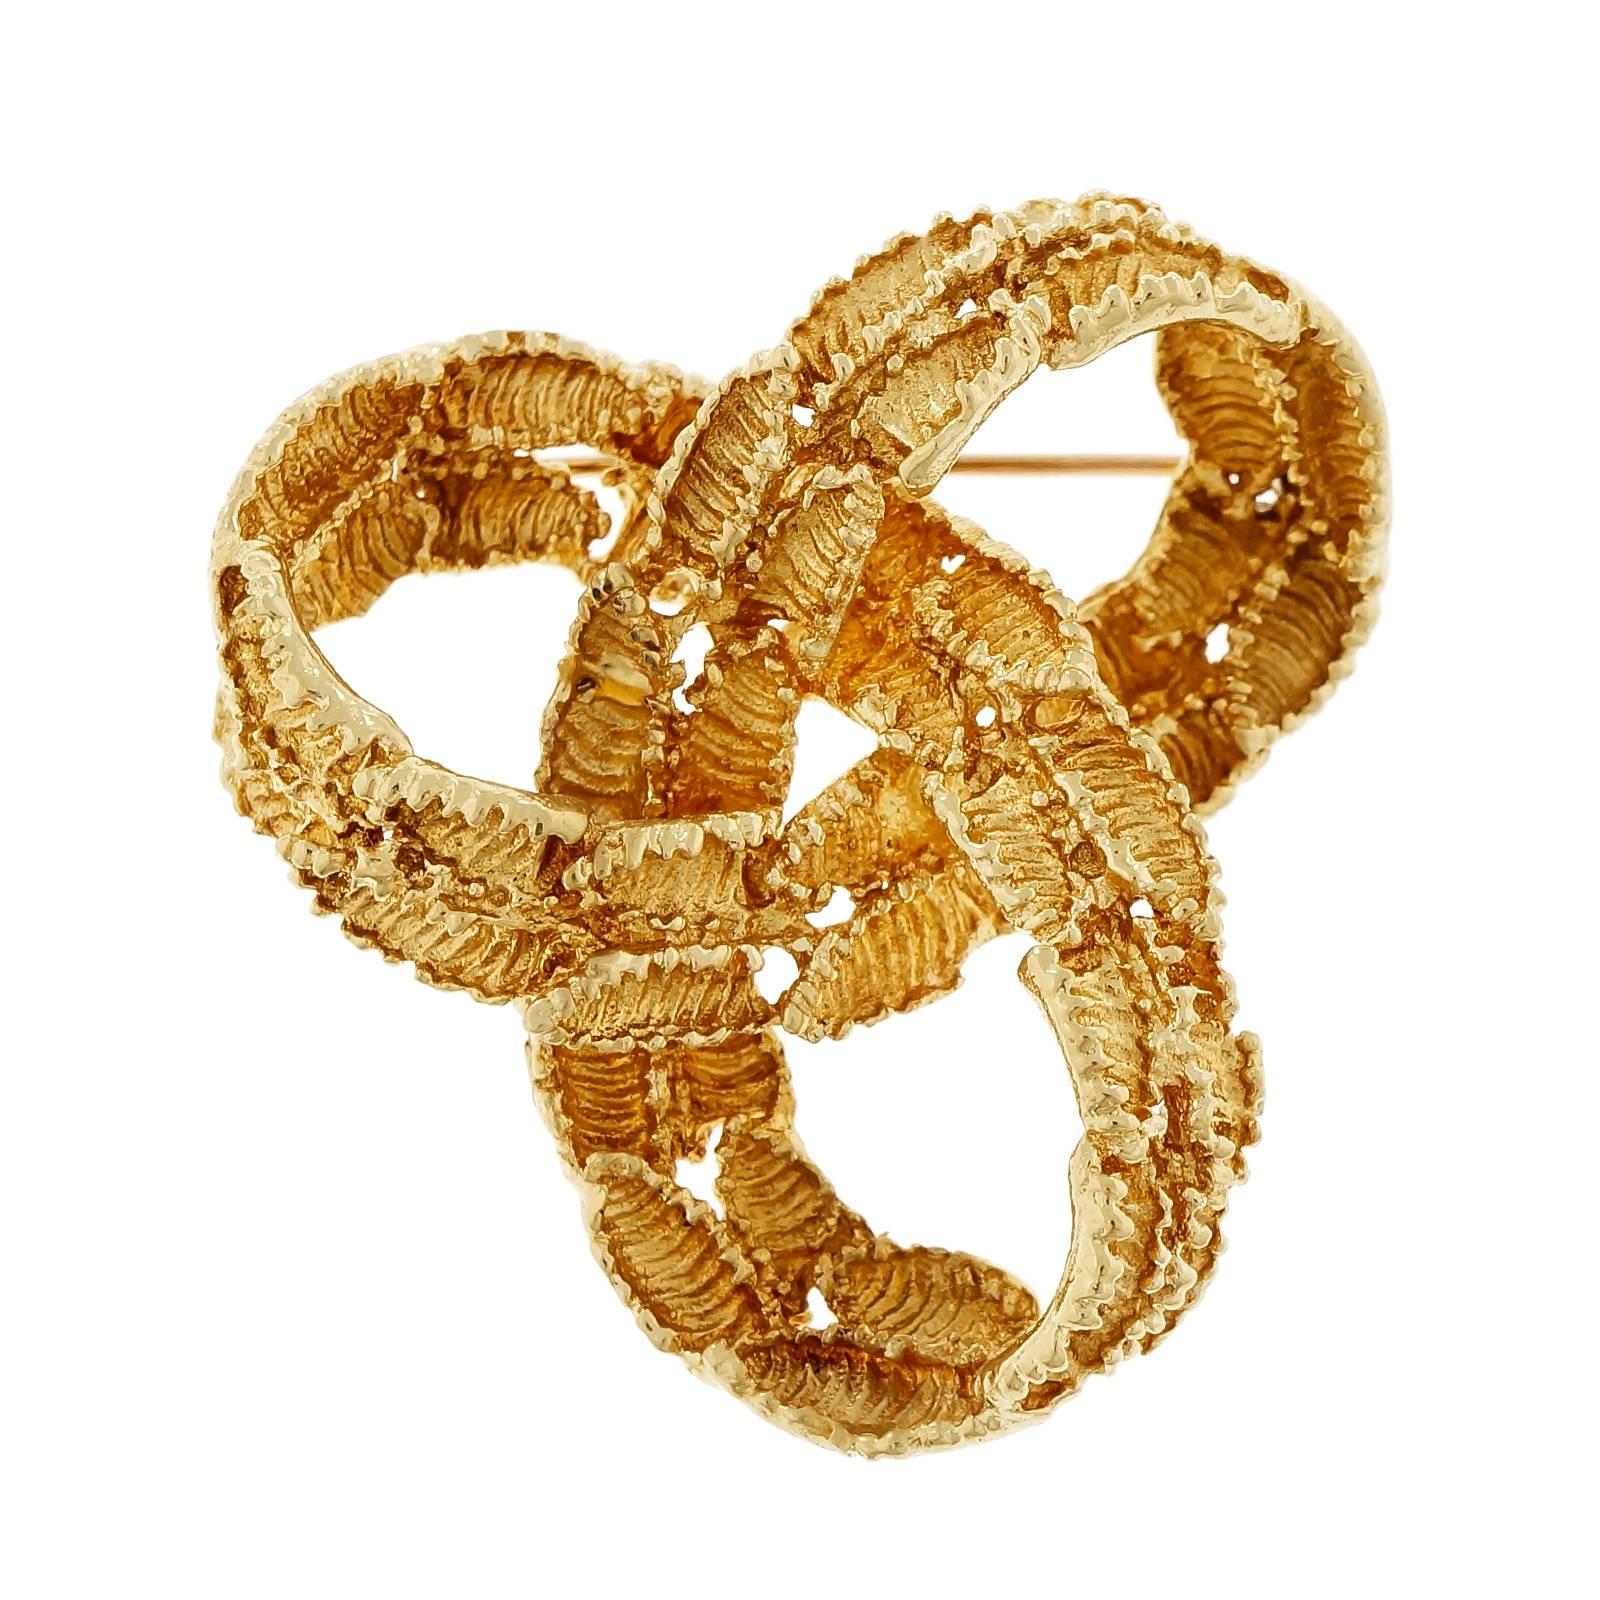 Tiffany & Co. Infinity Textured Gold Knot Brooch